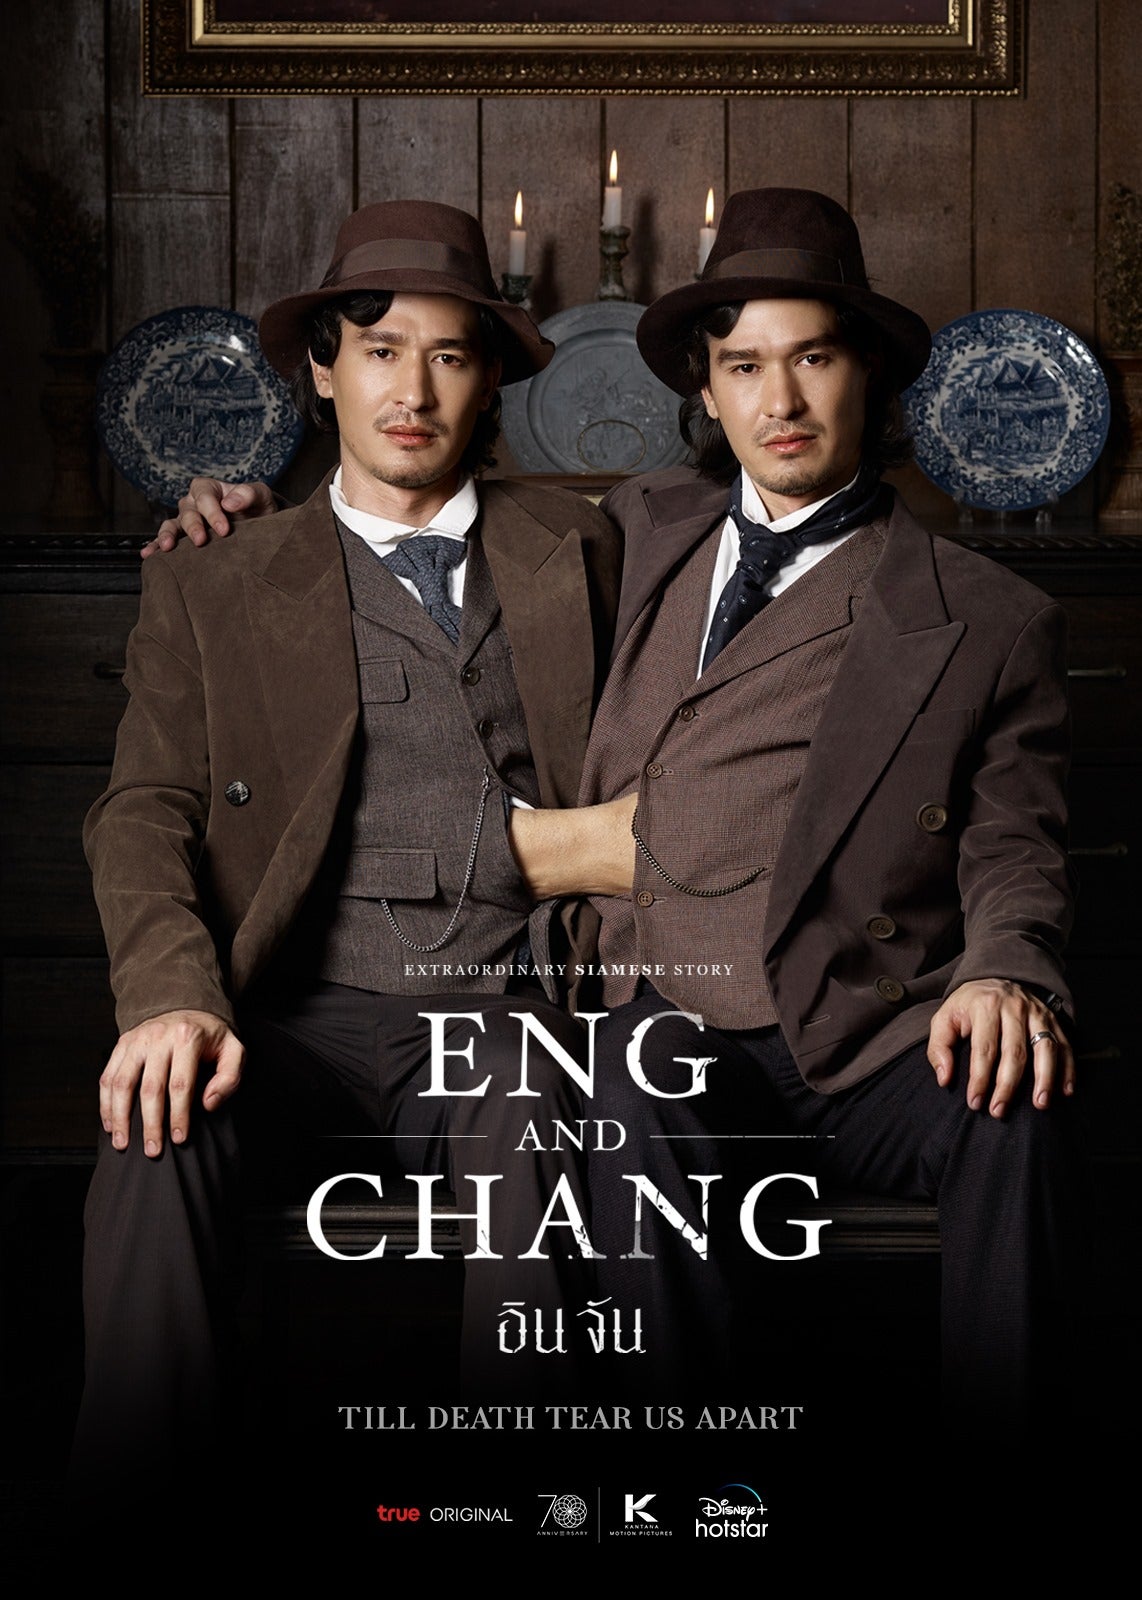 TV ratings for Extraordinary Siamese Story: Eng And Chang (อินจัน) in Portugal. Disney+ TV series